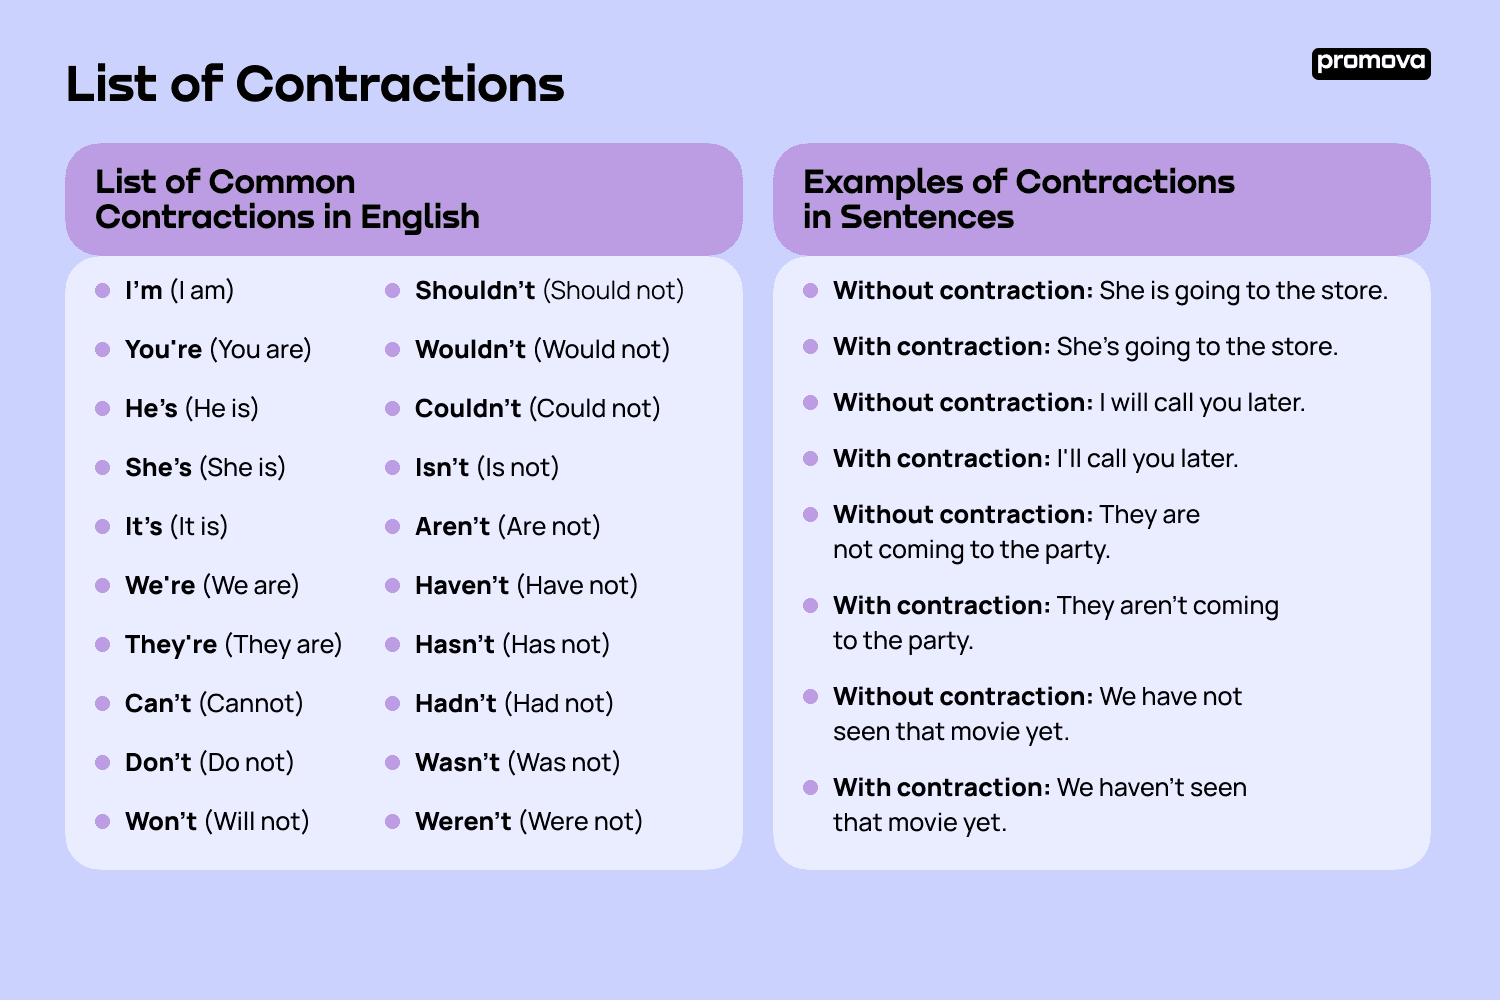 List of Common Contractions in English